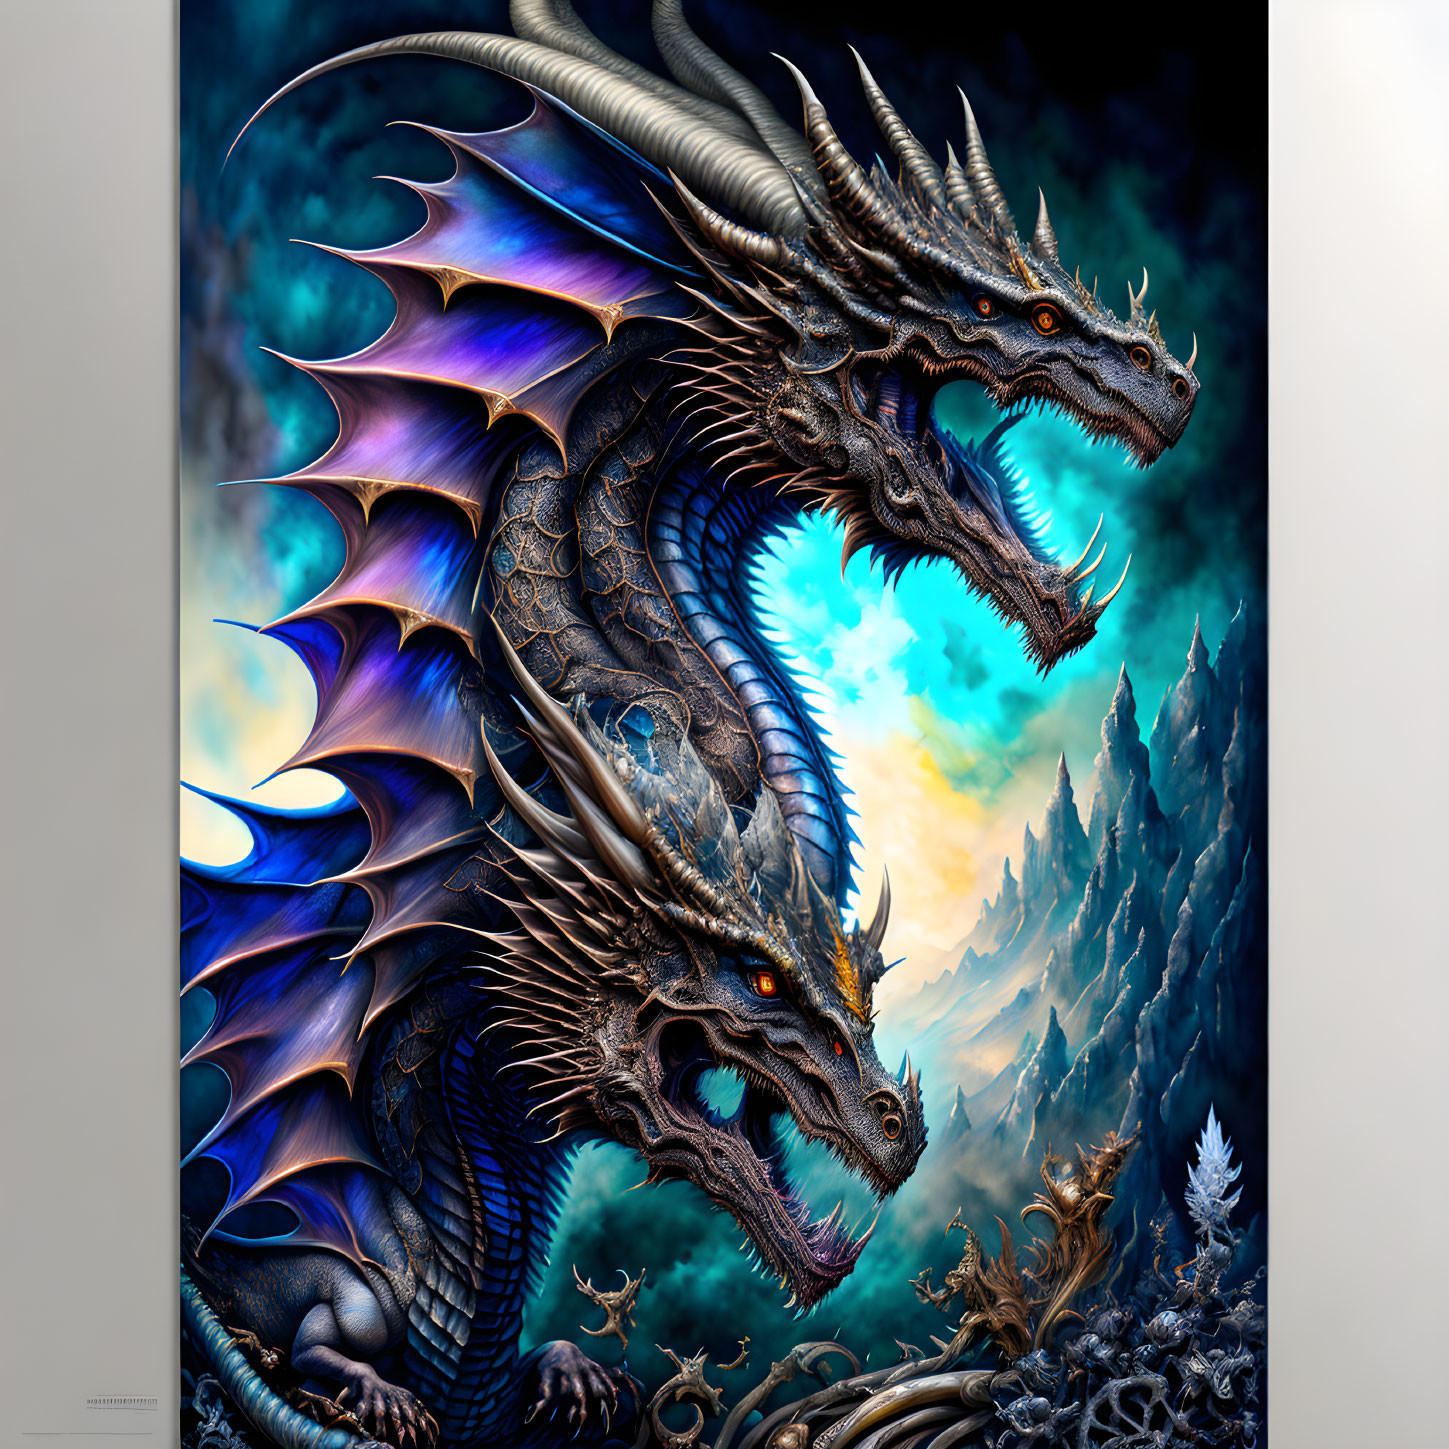 Iridescent-winged two-headed dragon in mountain landscape